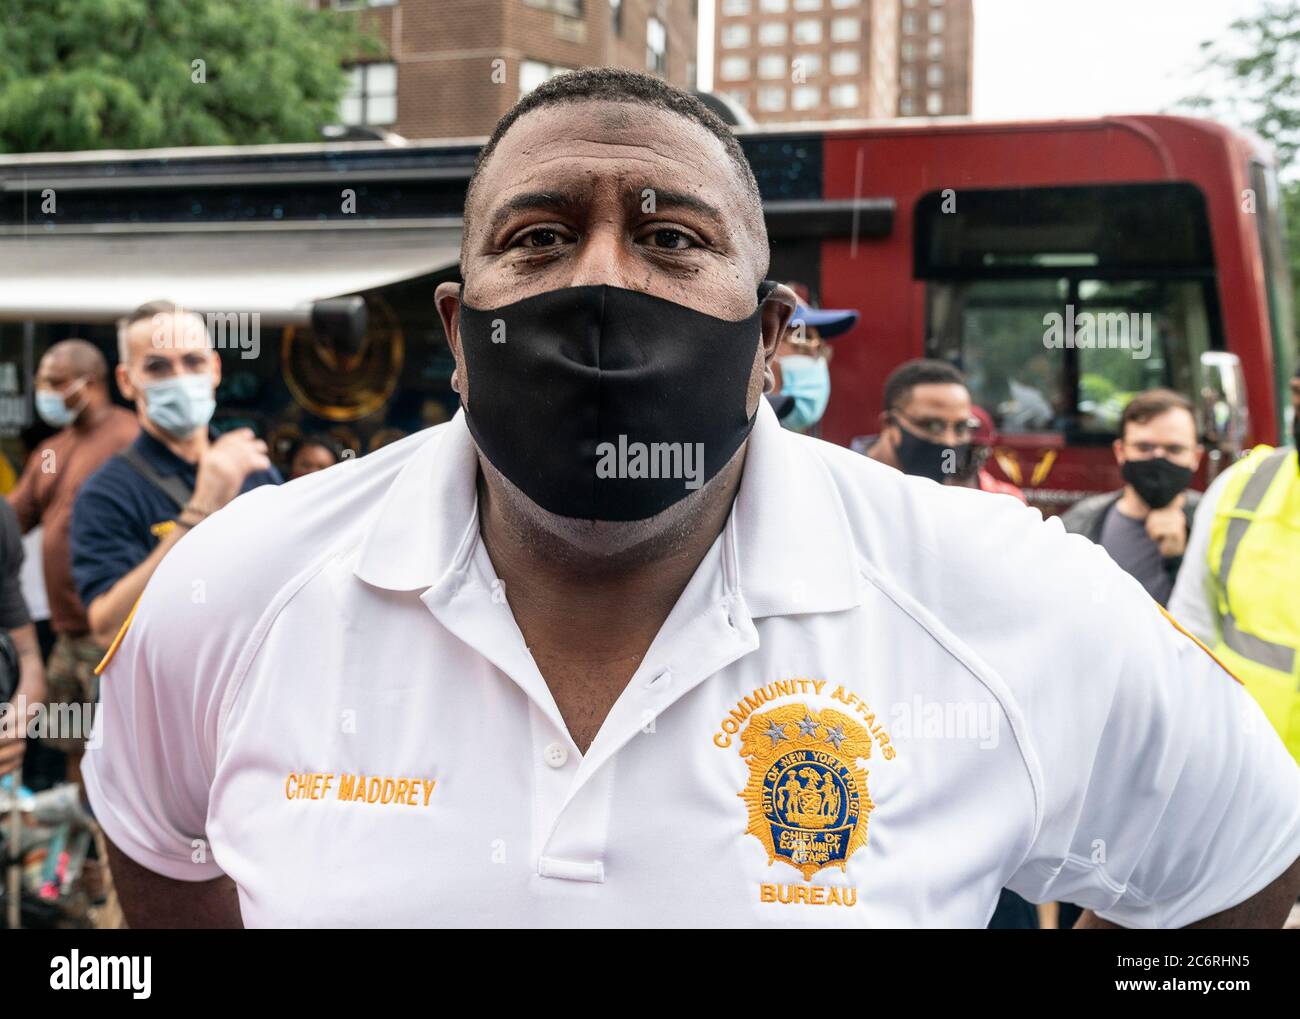 New York, United States. 11th July, 2020. NYPD Chief Jeffrey Maddrey attends Occupy the Corner rally in East Harlem in response on gun violence in New York on July 11, 2020. Gun violence in 2020 surged by more than 100% in New York City mostly in neighborhoods with high rate of poverty and high level of COVID-19 cases. Community activists and police department encreased presence in those areas in order to stop gun violence. (Photo by Lev Radin/Sipa USA) Credit: Sipa USA/Alamy Live News Stock Photo